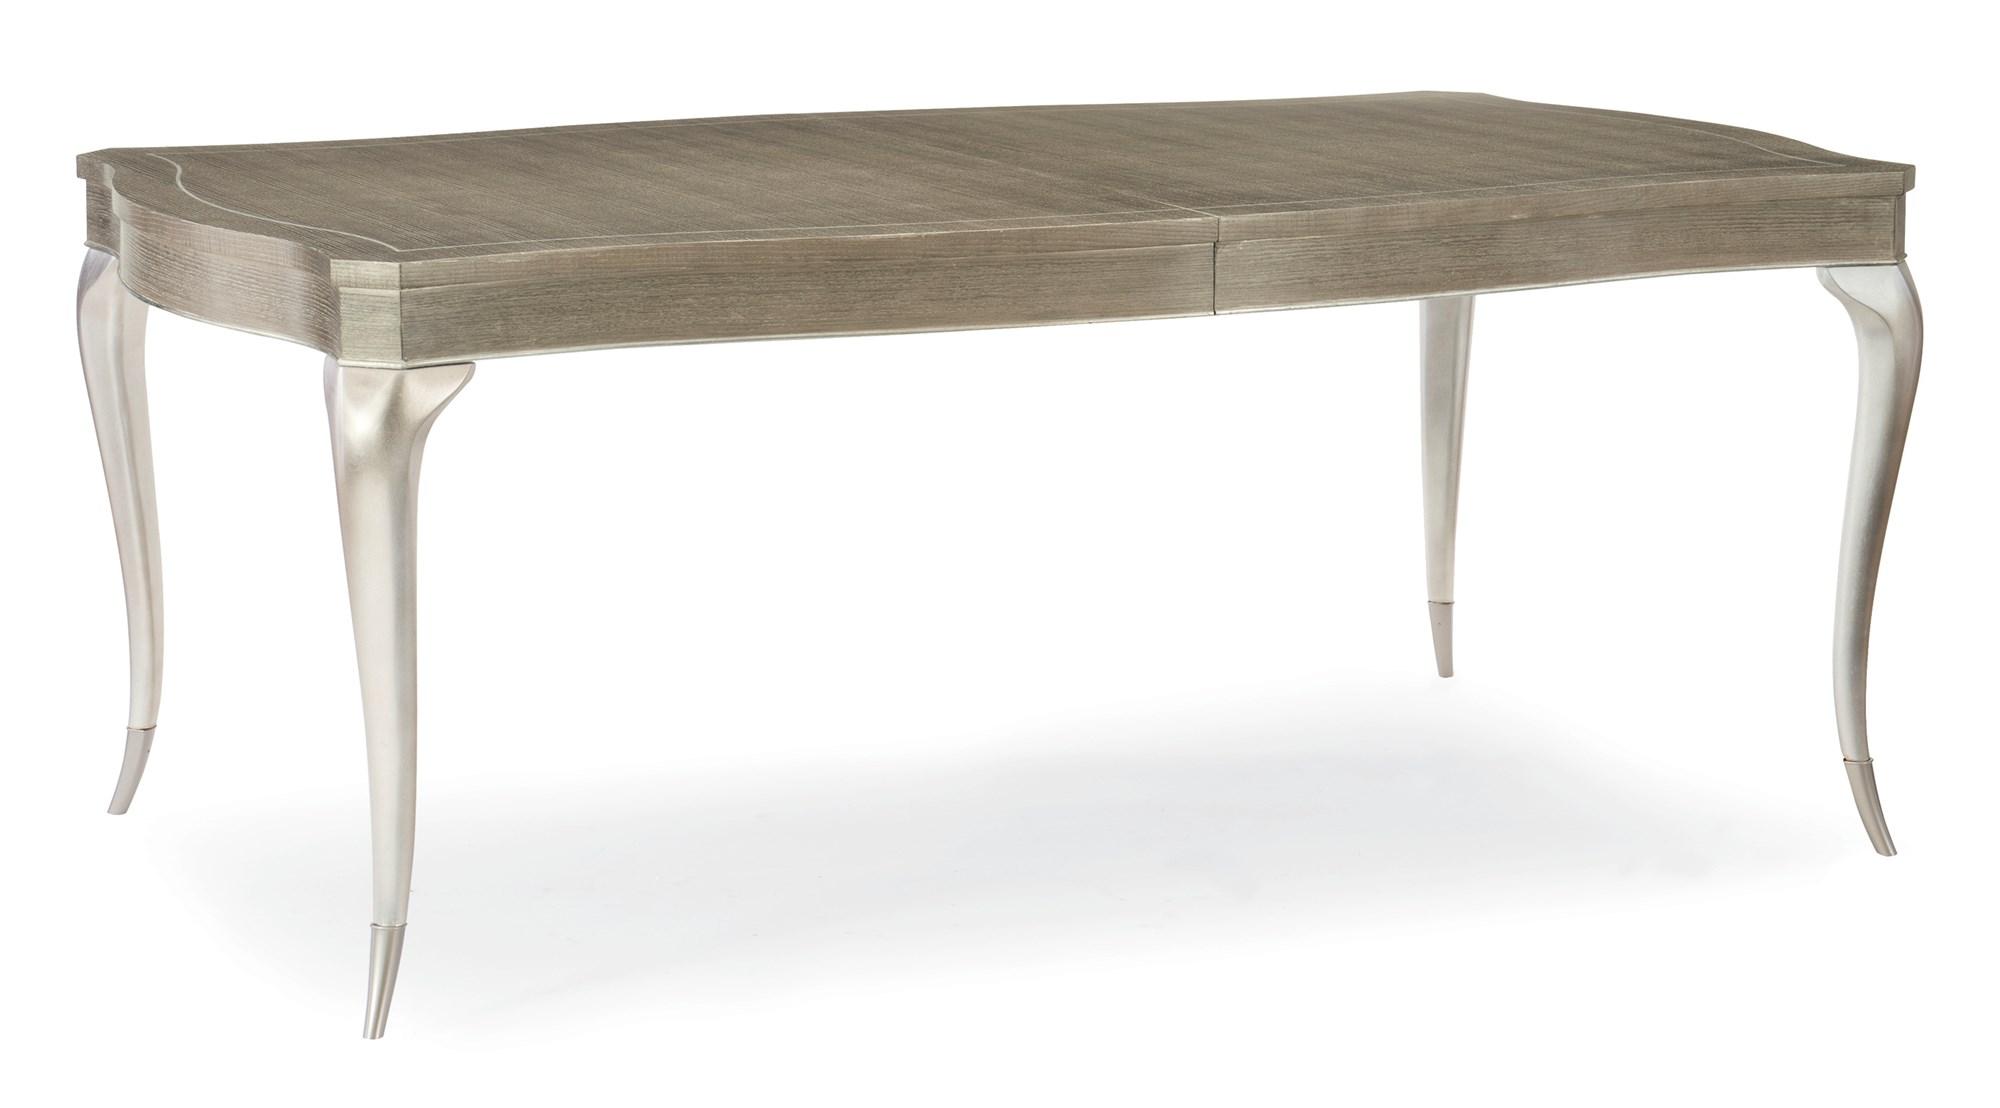 Contemporary Dining Table AVONDALE RECTANGLE DINING TABLE C022-417-201 in Driftwood, Silver 